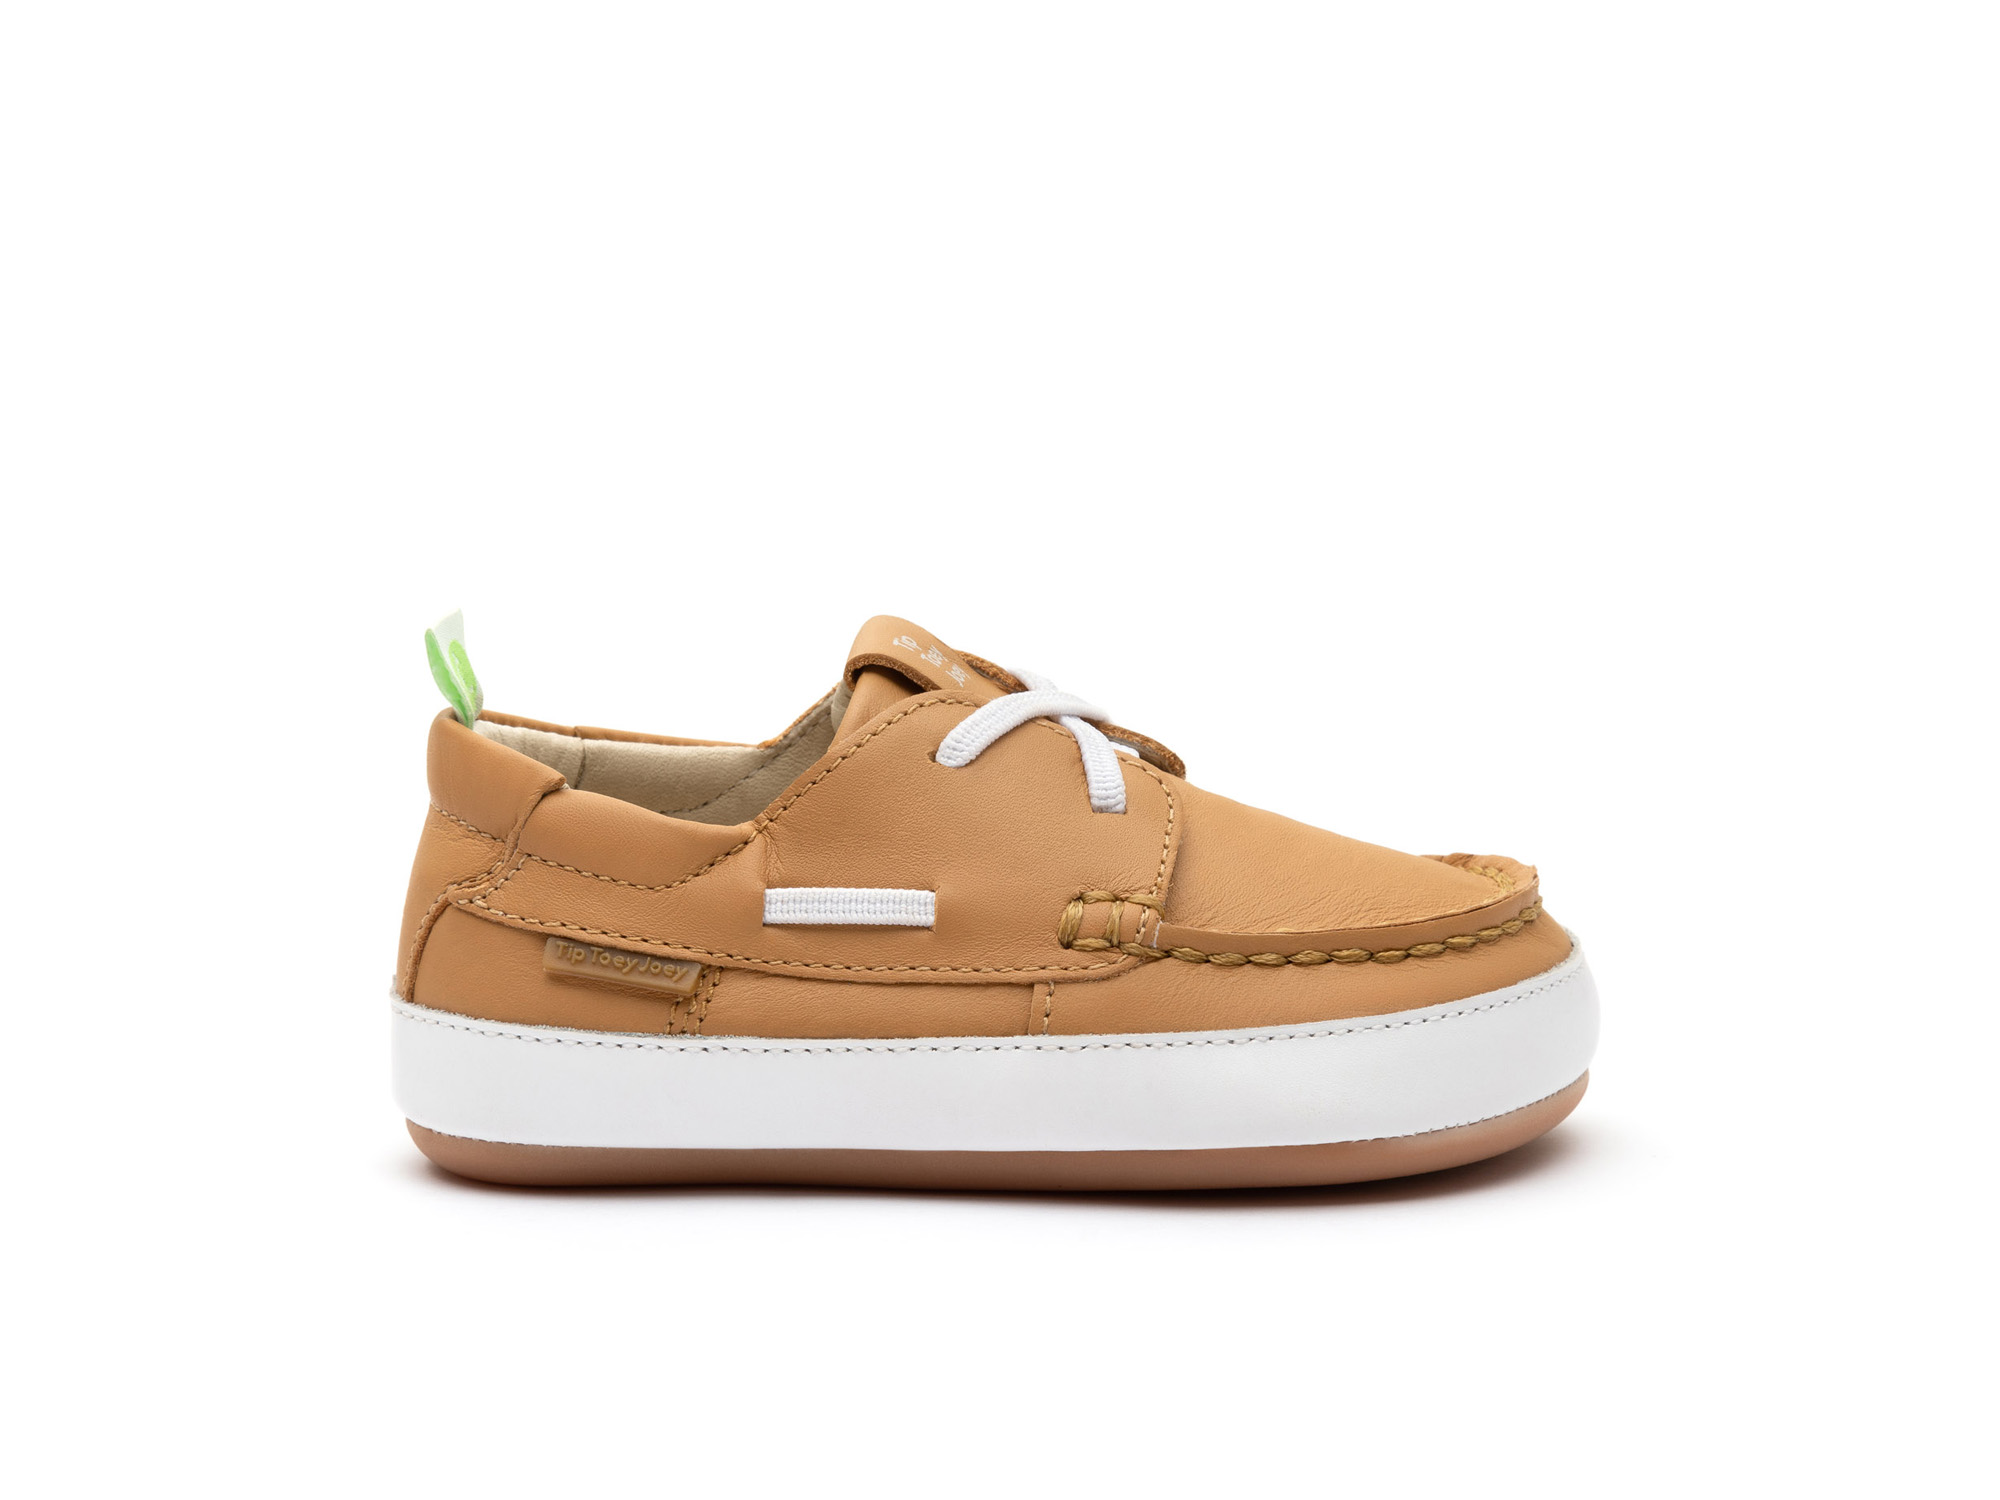 UP & GO Sneakers for Boys Boaty | Tip Toey Joey - Australia - 4